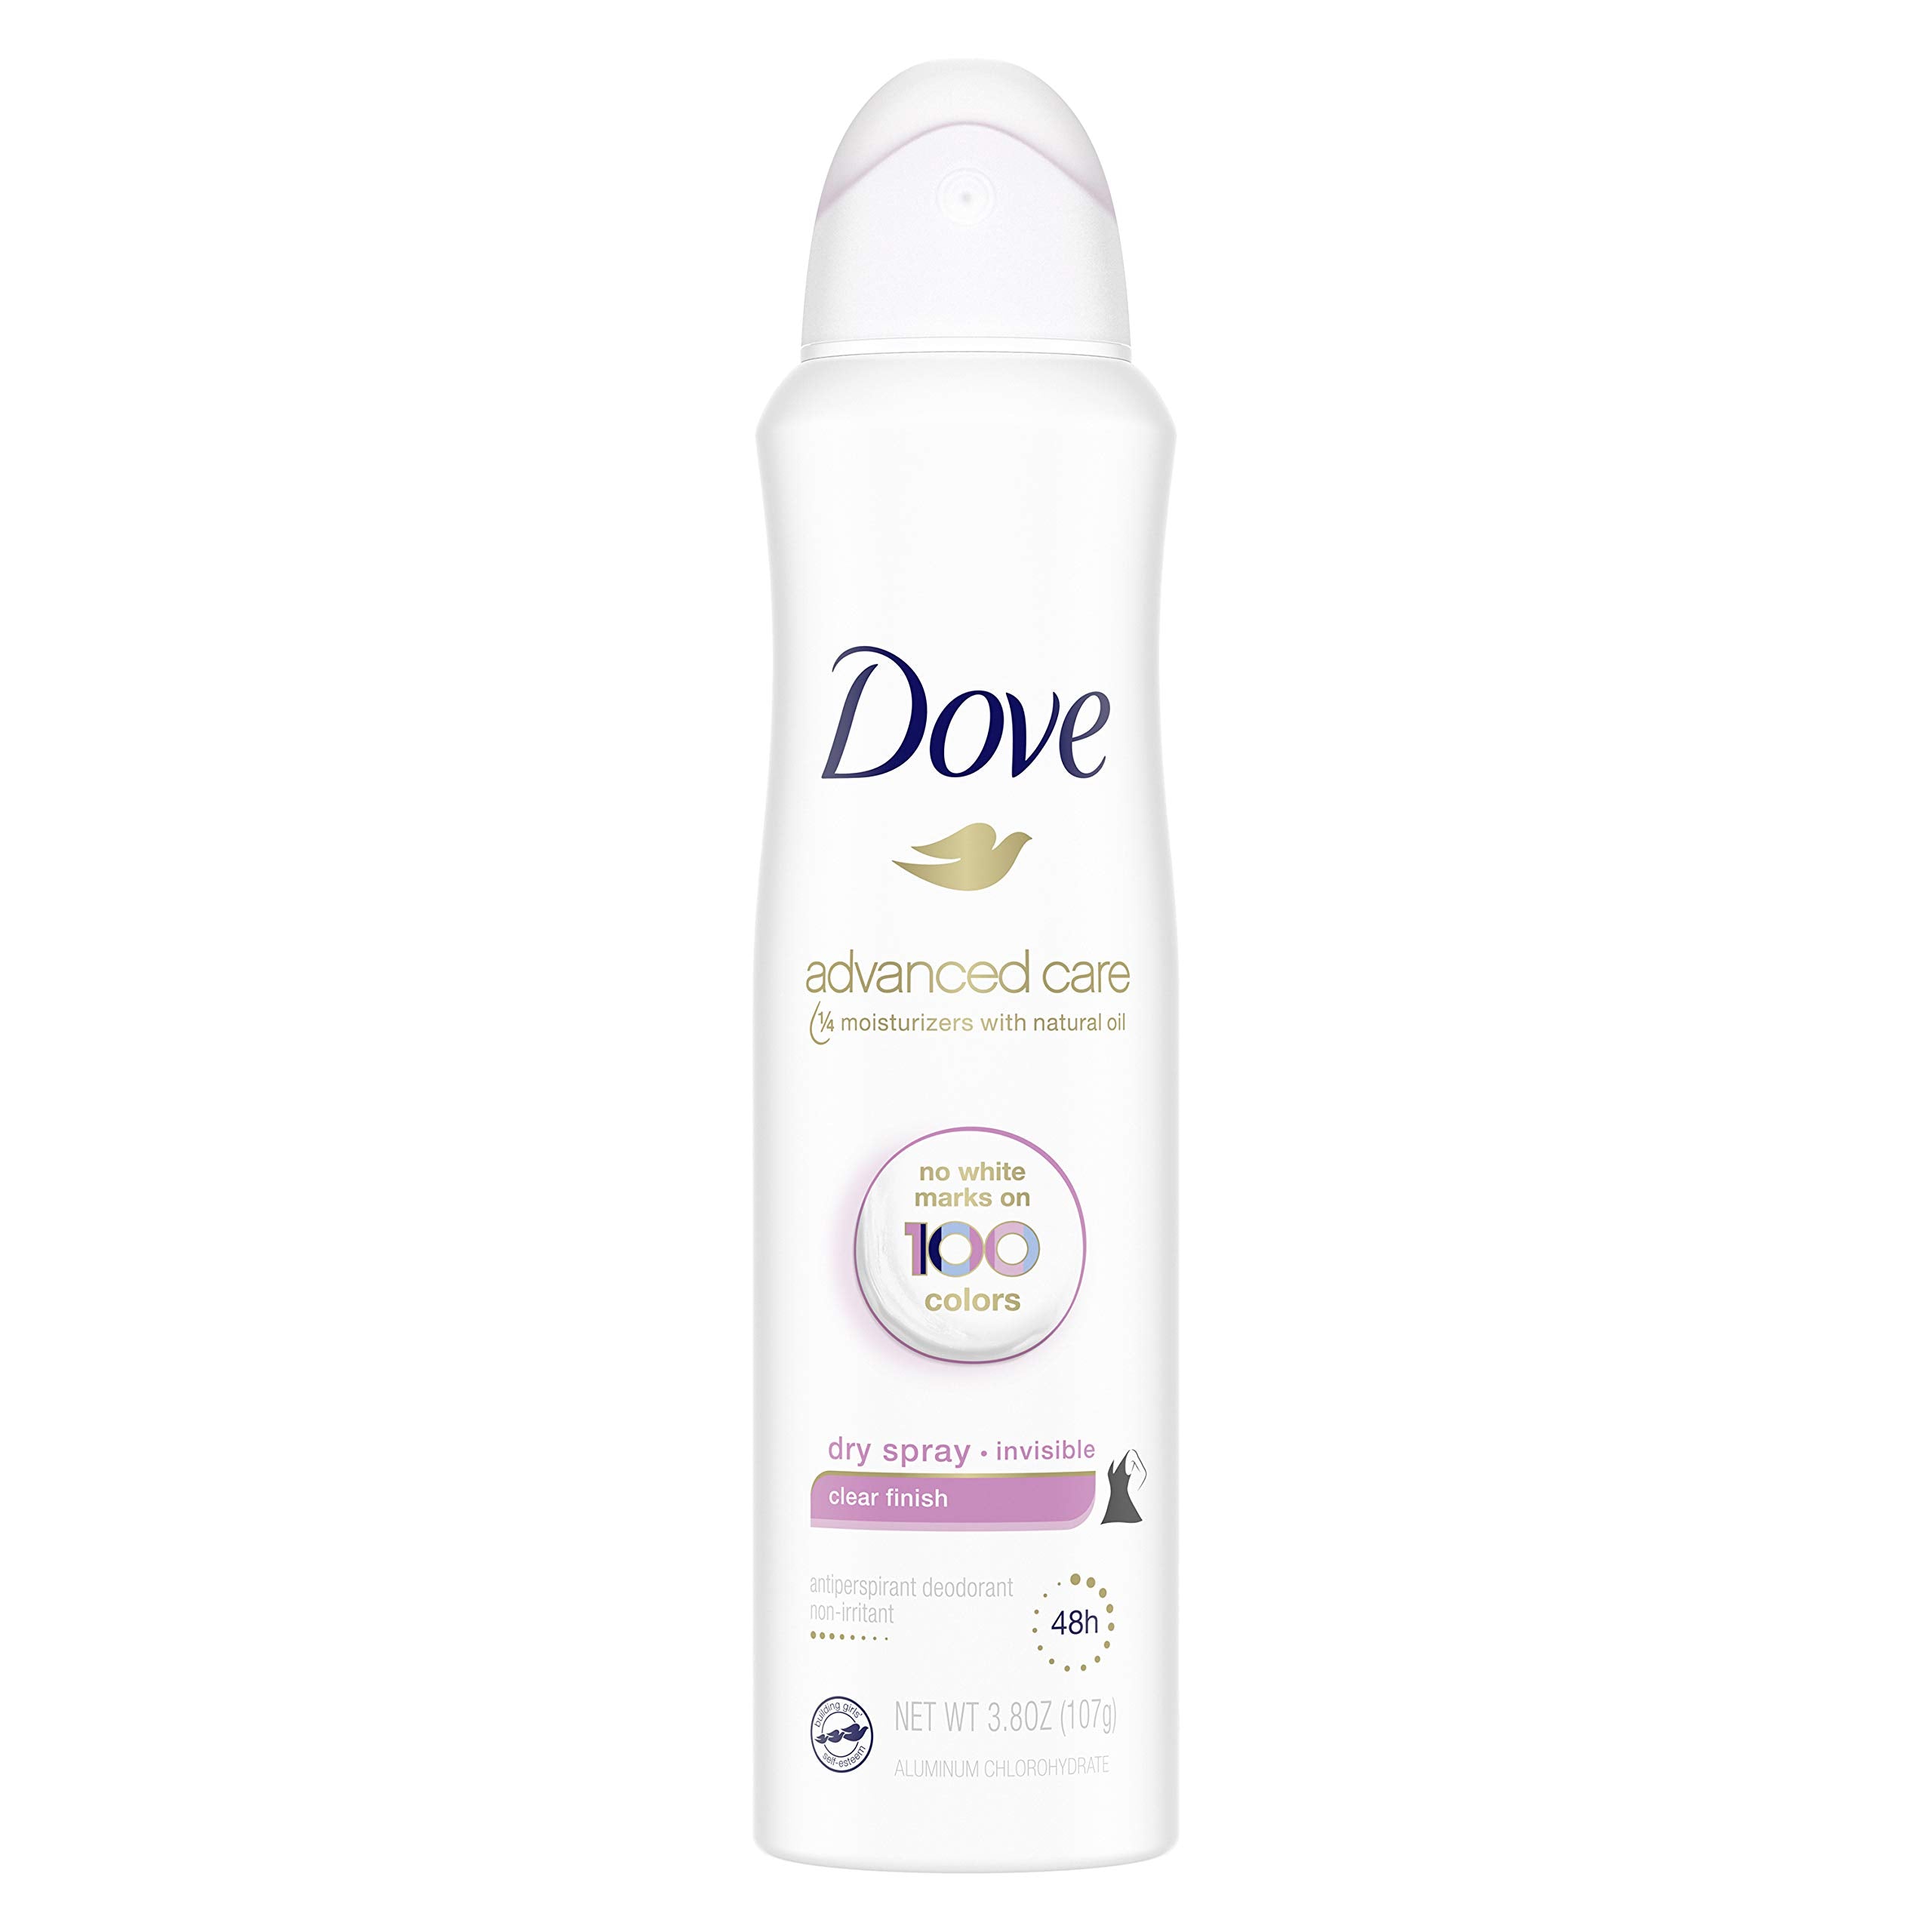 Dove Advanced Care Invisible Dry Spray Antiperspirant Deodorant No White Marks on 100 Colors Clear Finish 48-Hour Sweat and Odor Protecting Deodorant for Women 3.8 oz